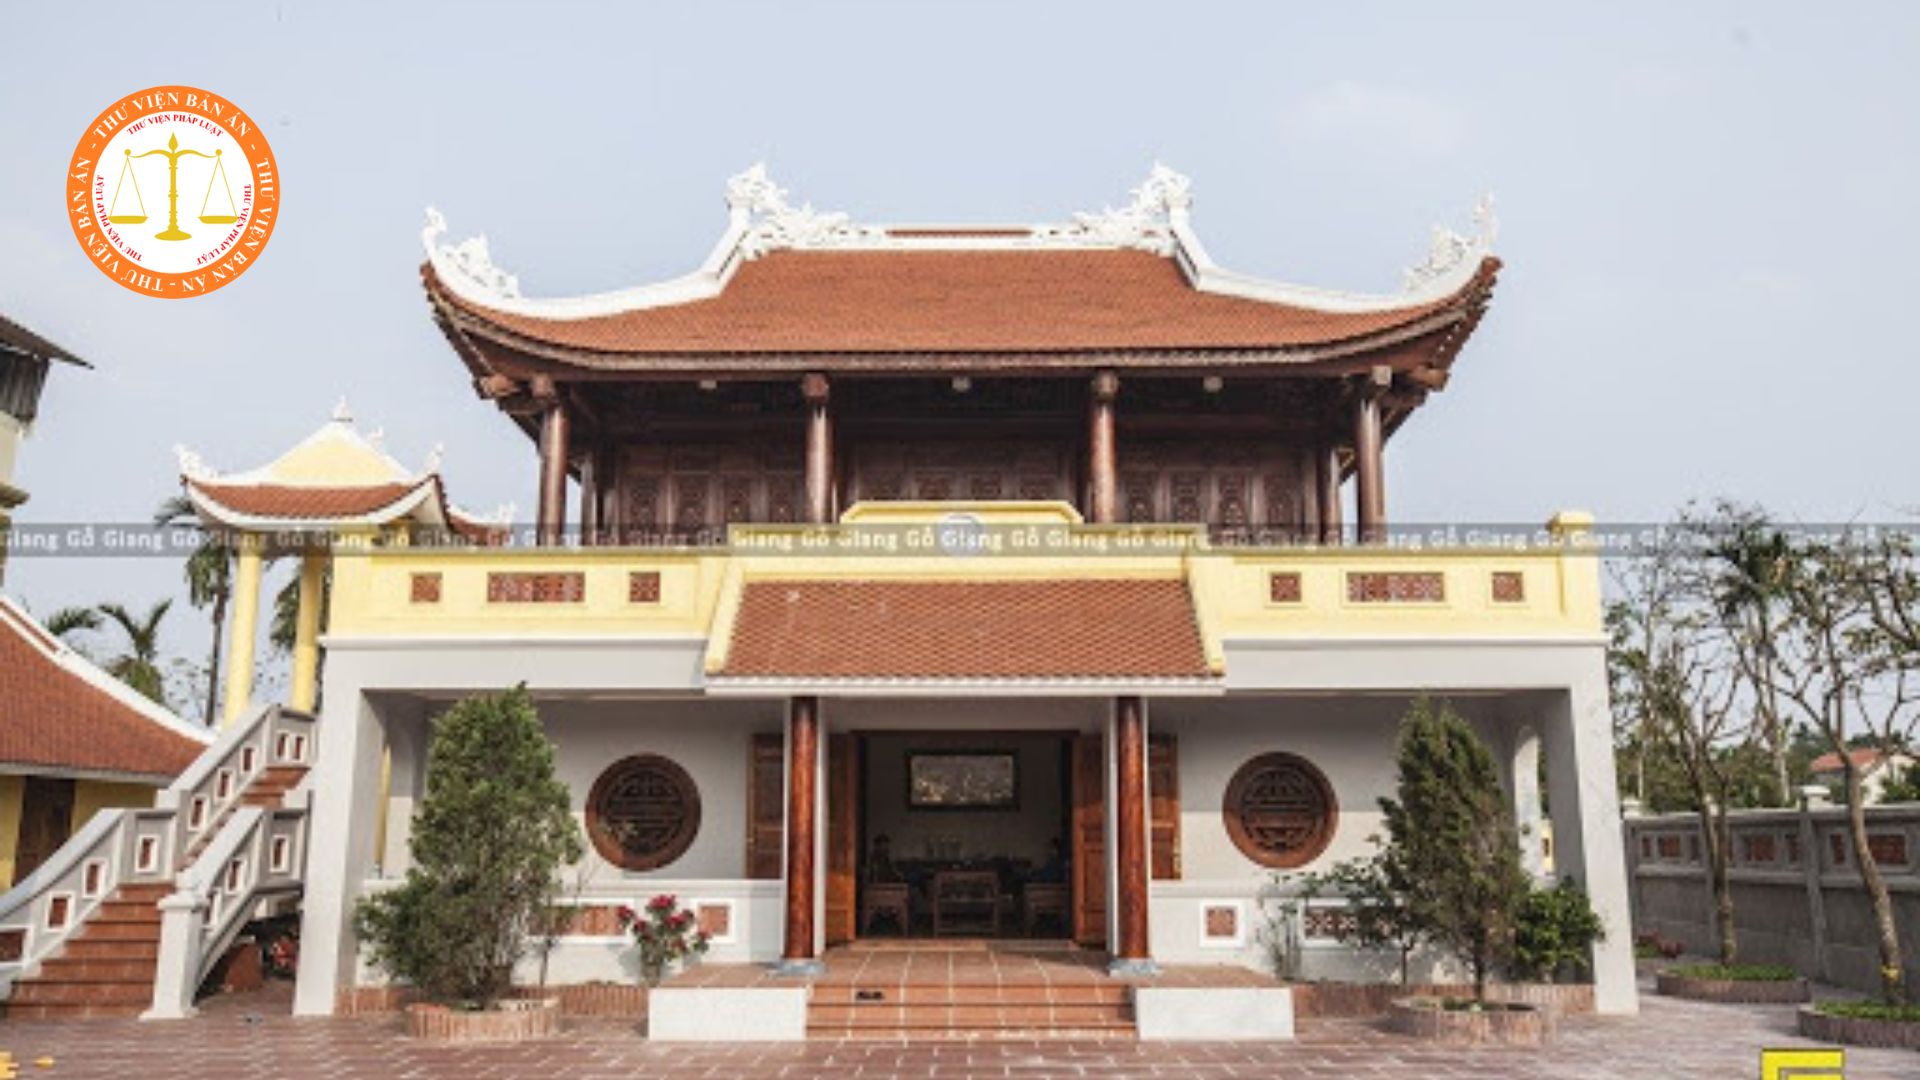 Is income from receipt of donation of land to build a lineage hall in Vietnam?